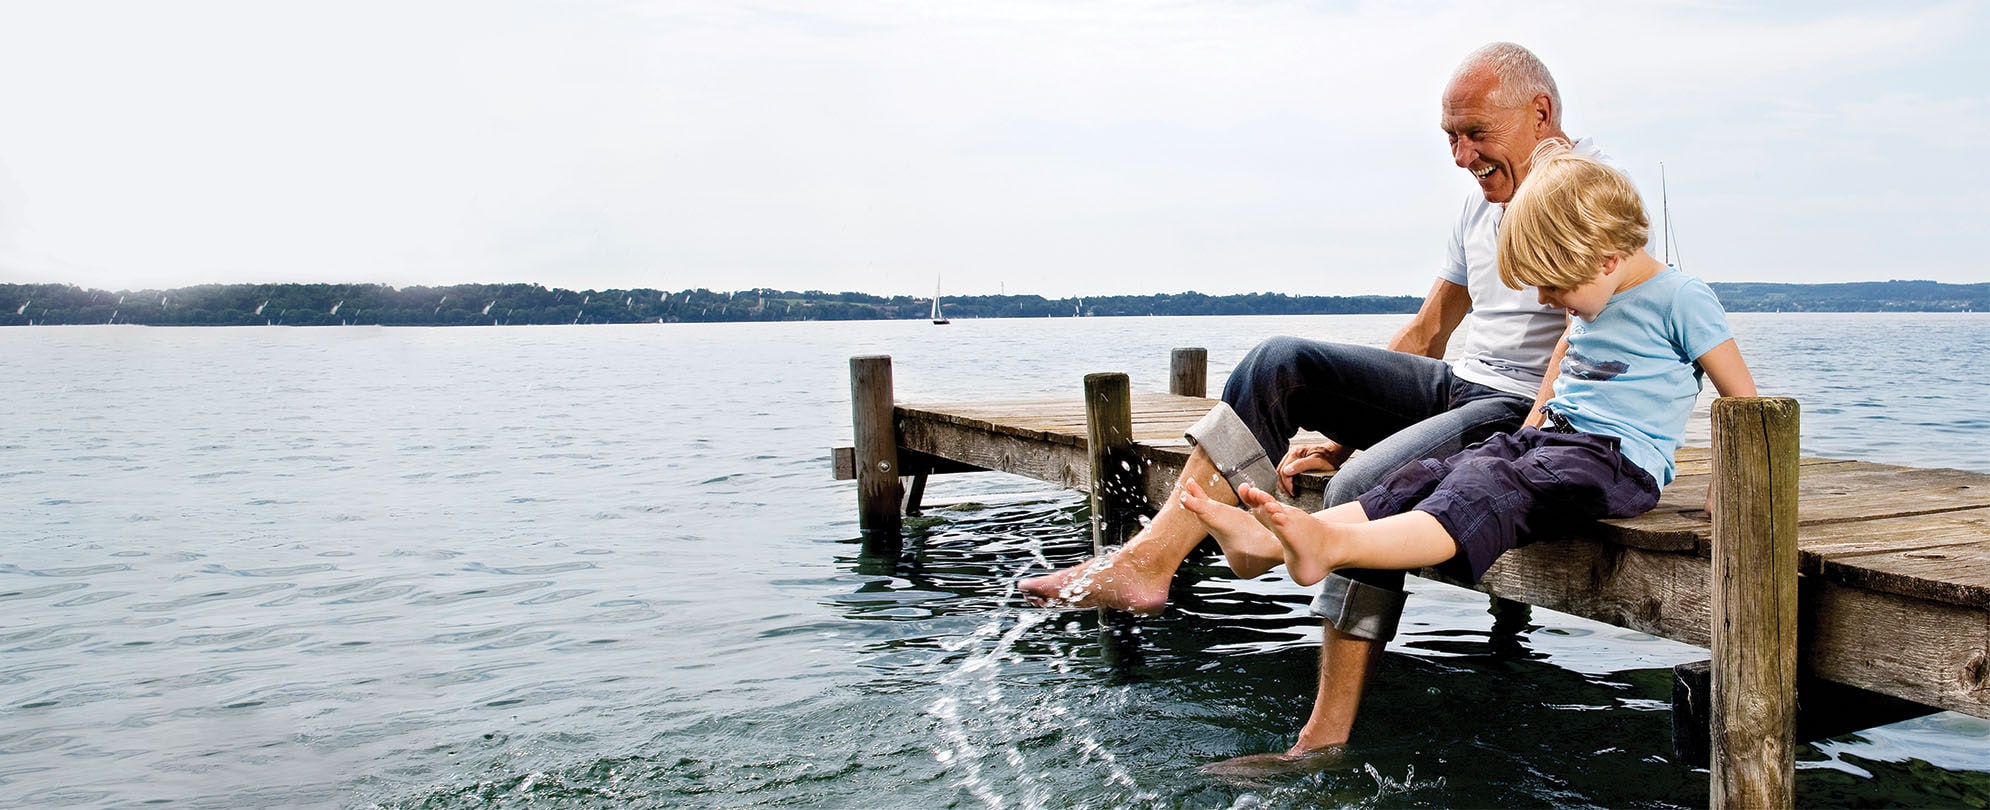 A grandpa and grandson sit on the edge of a dock while splashing the water with their feet